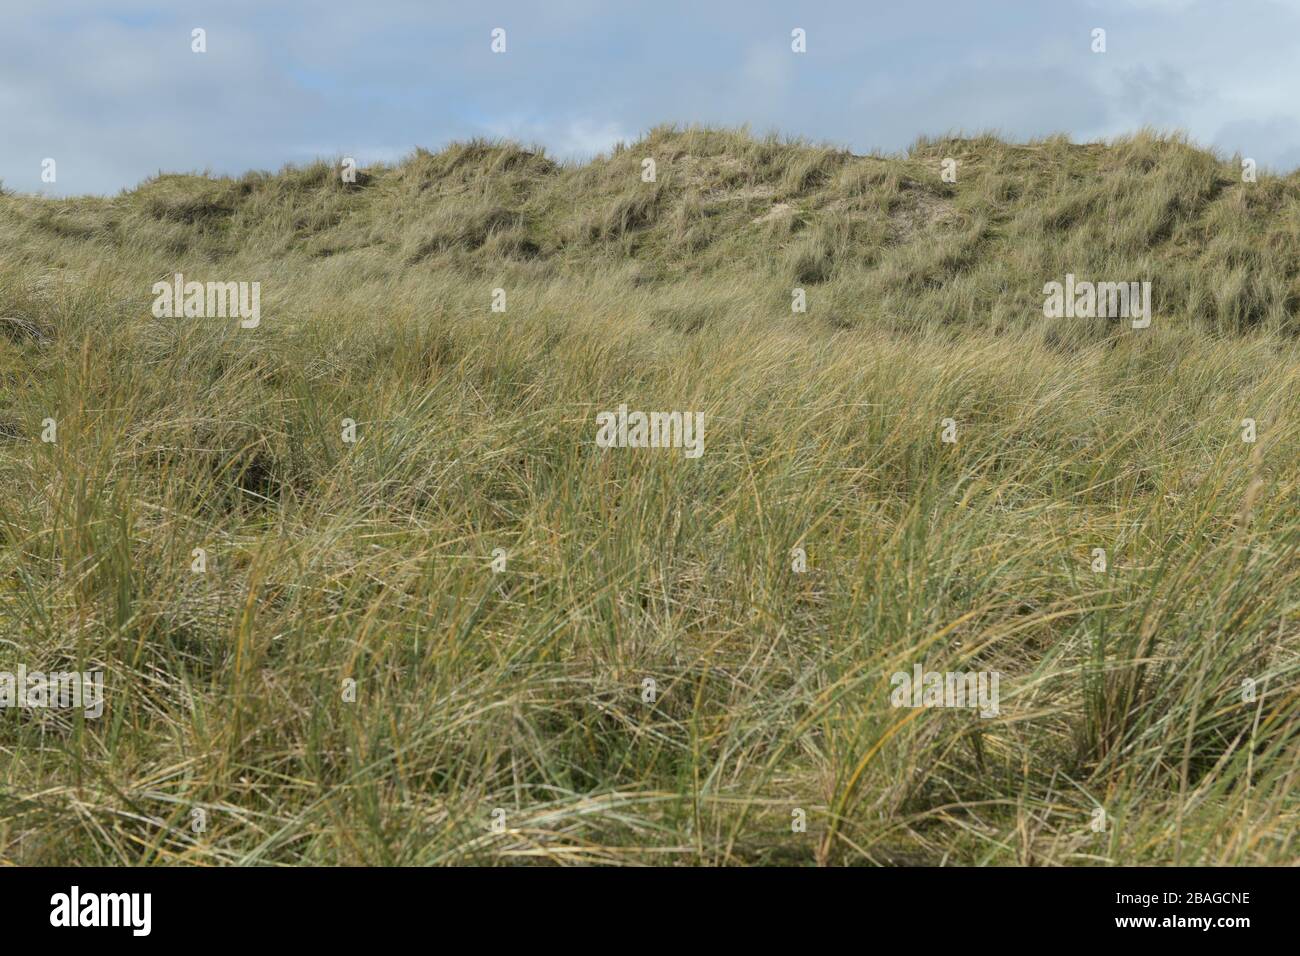 Maram Grass on sunny day with blue sky and white clouds, Jersey, Channel Islands. Stock Photo